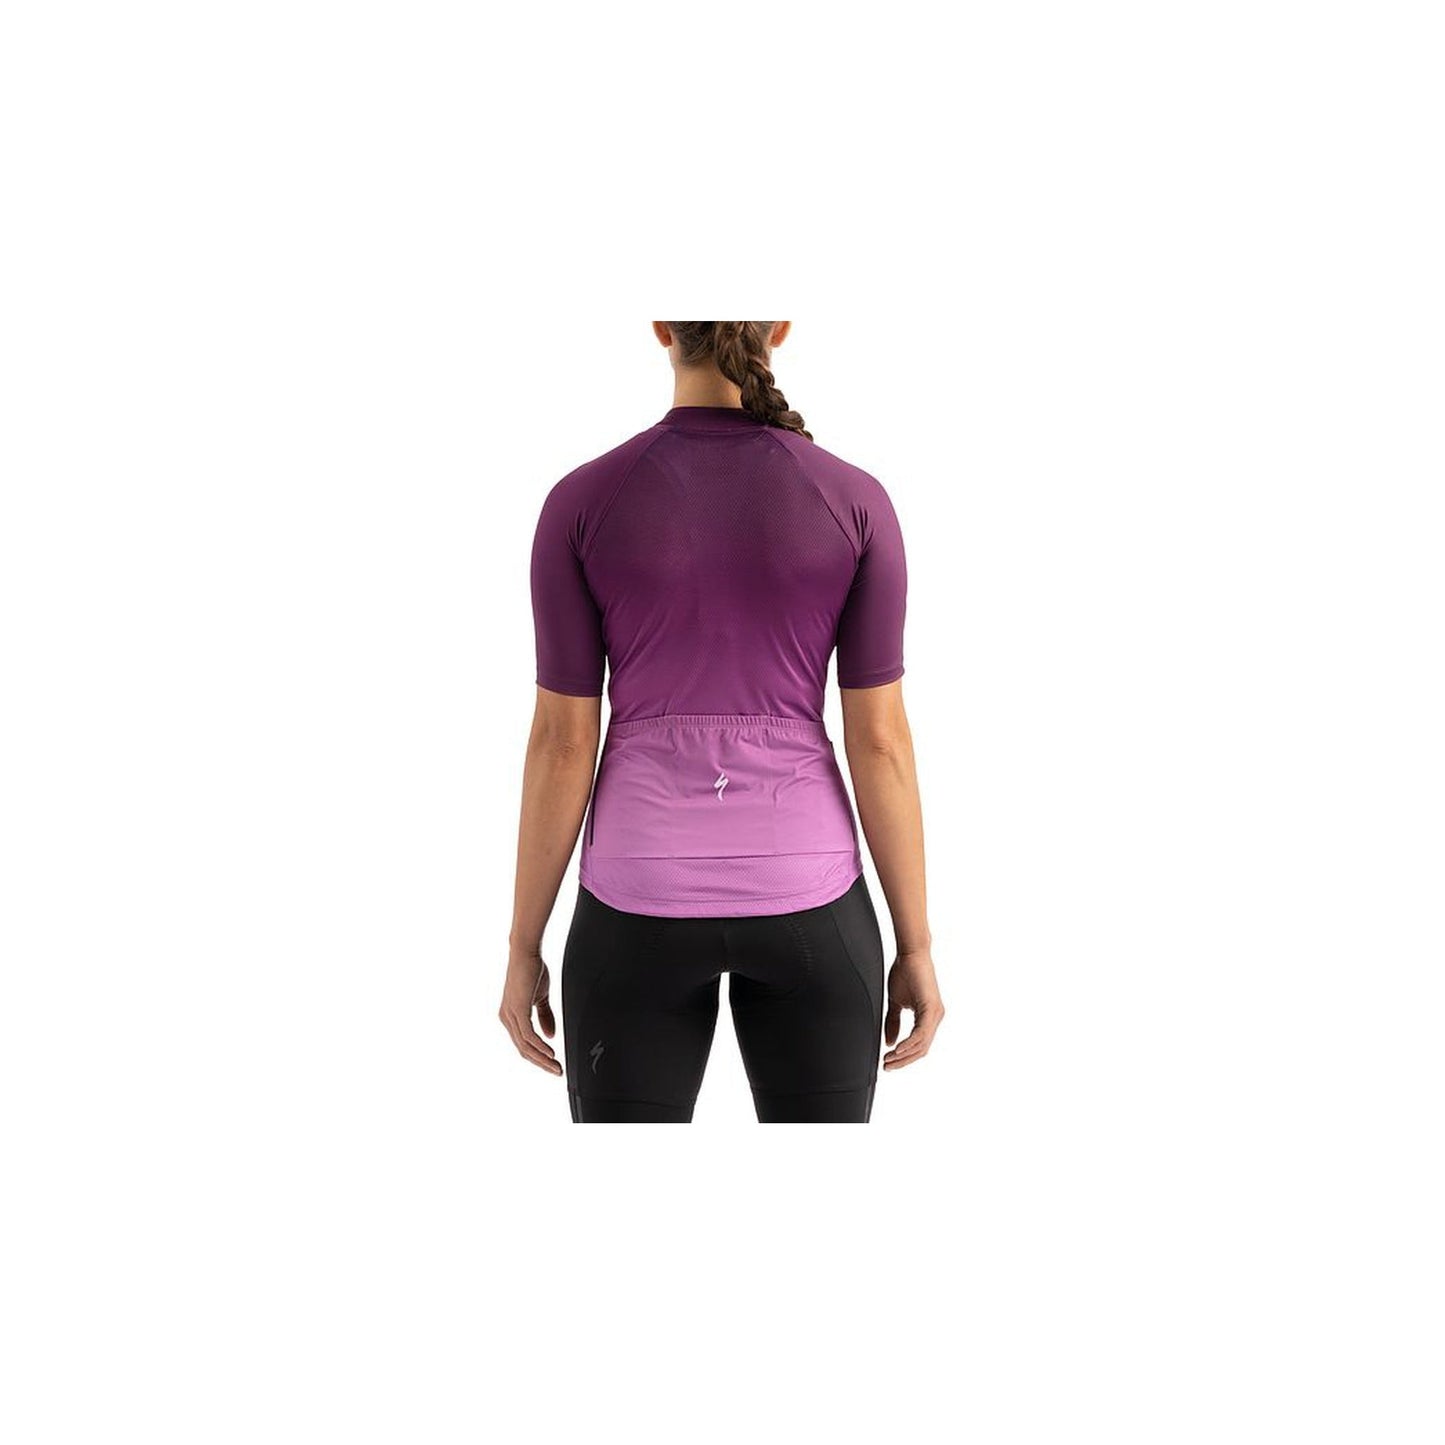 Women's SL Jersey-Cycles Direct Specialized